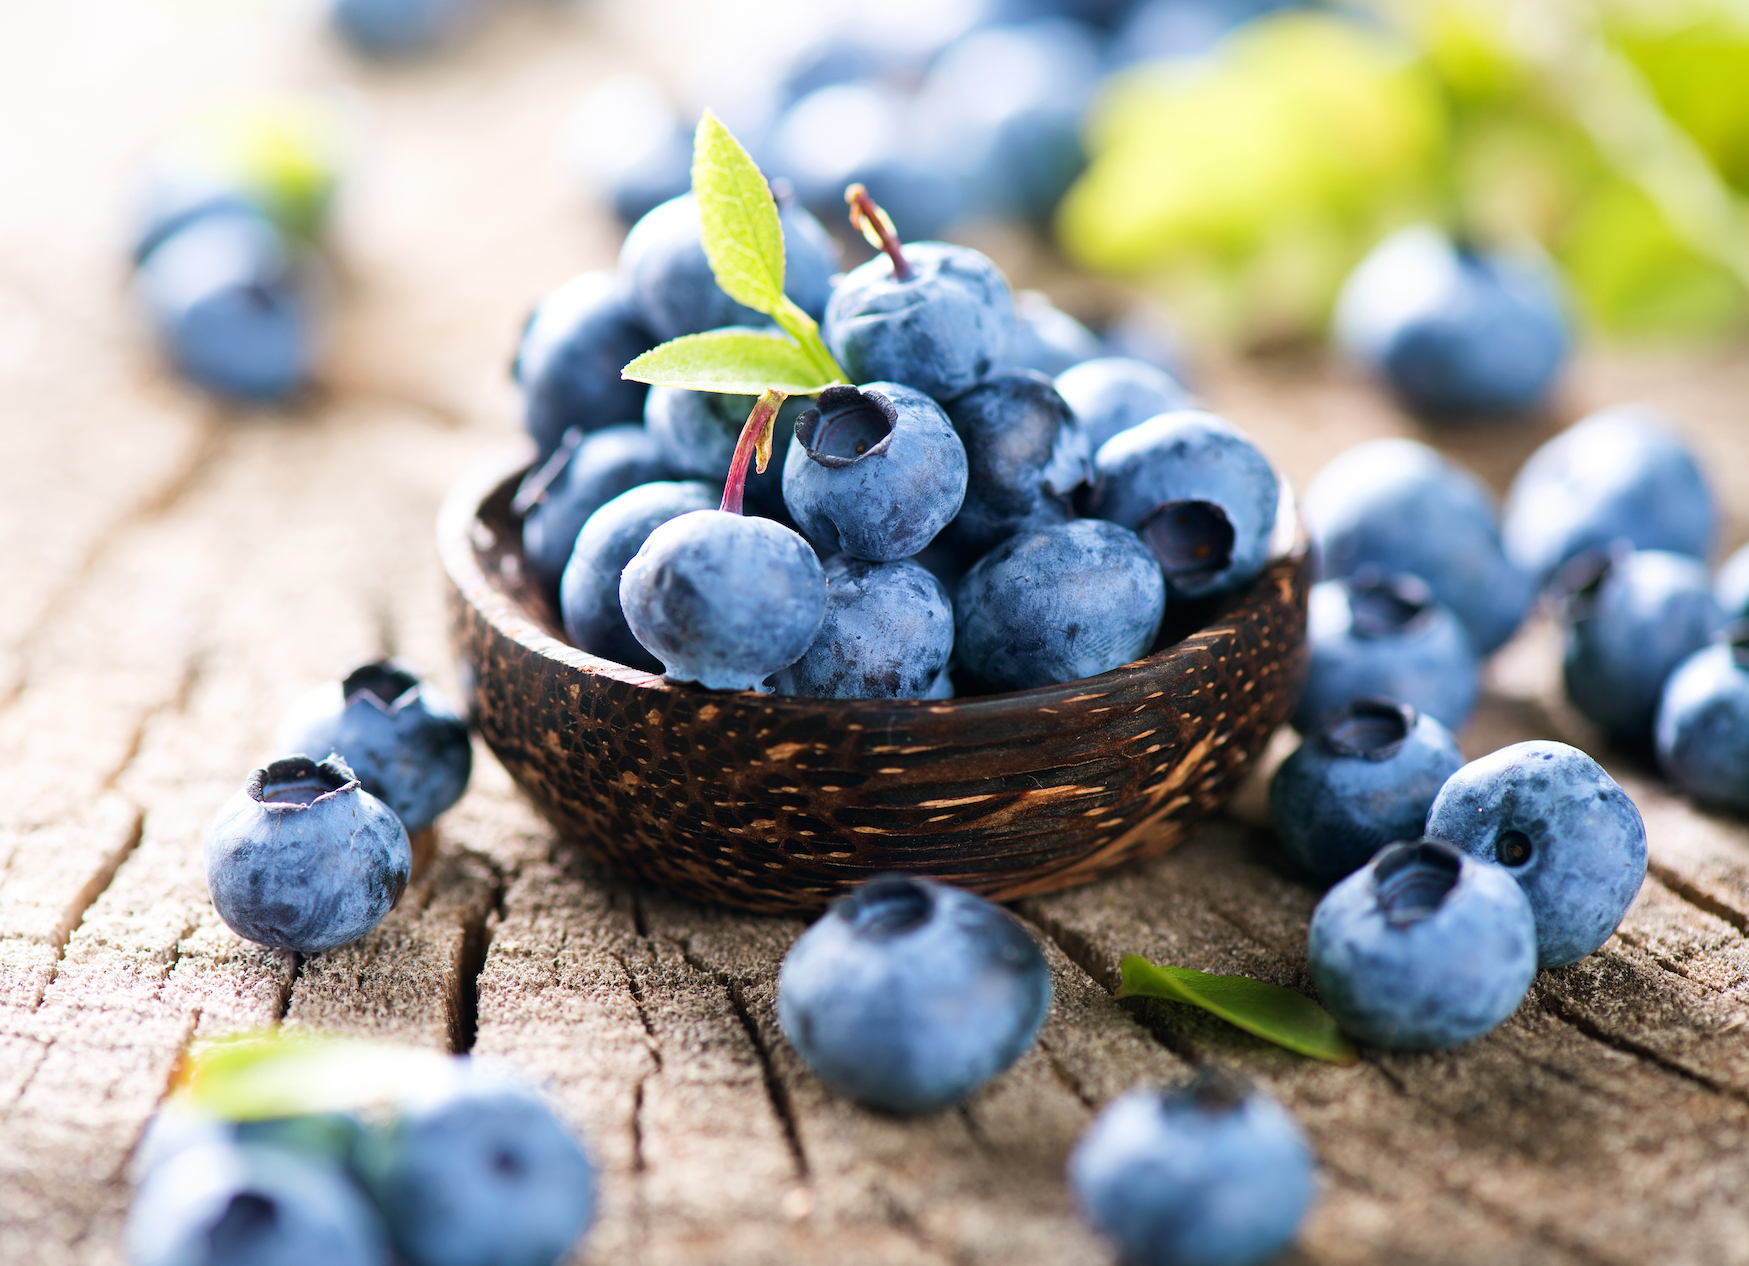 5 Reasons Why Blueberries Are so Healthy